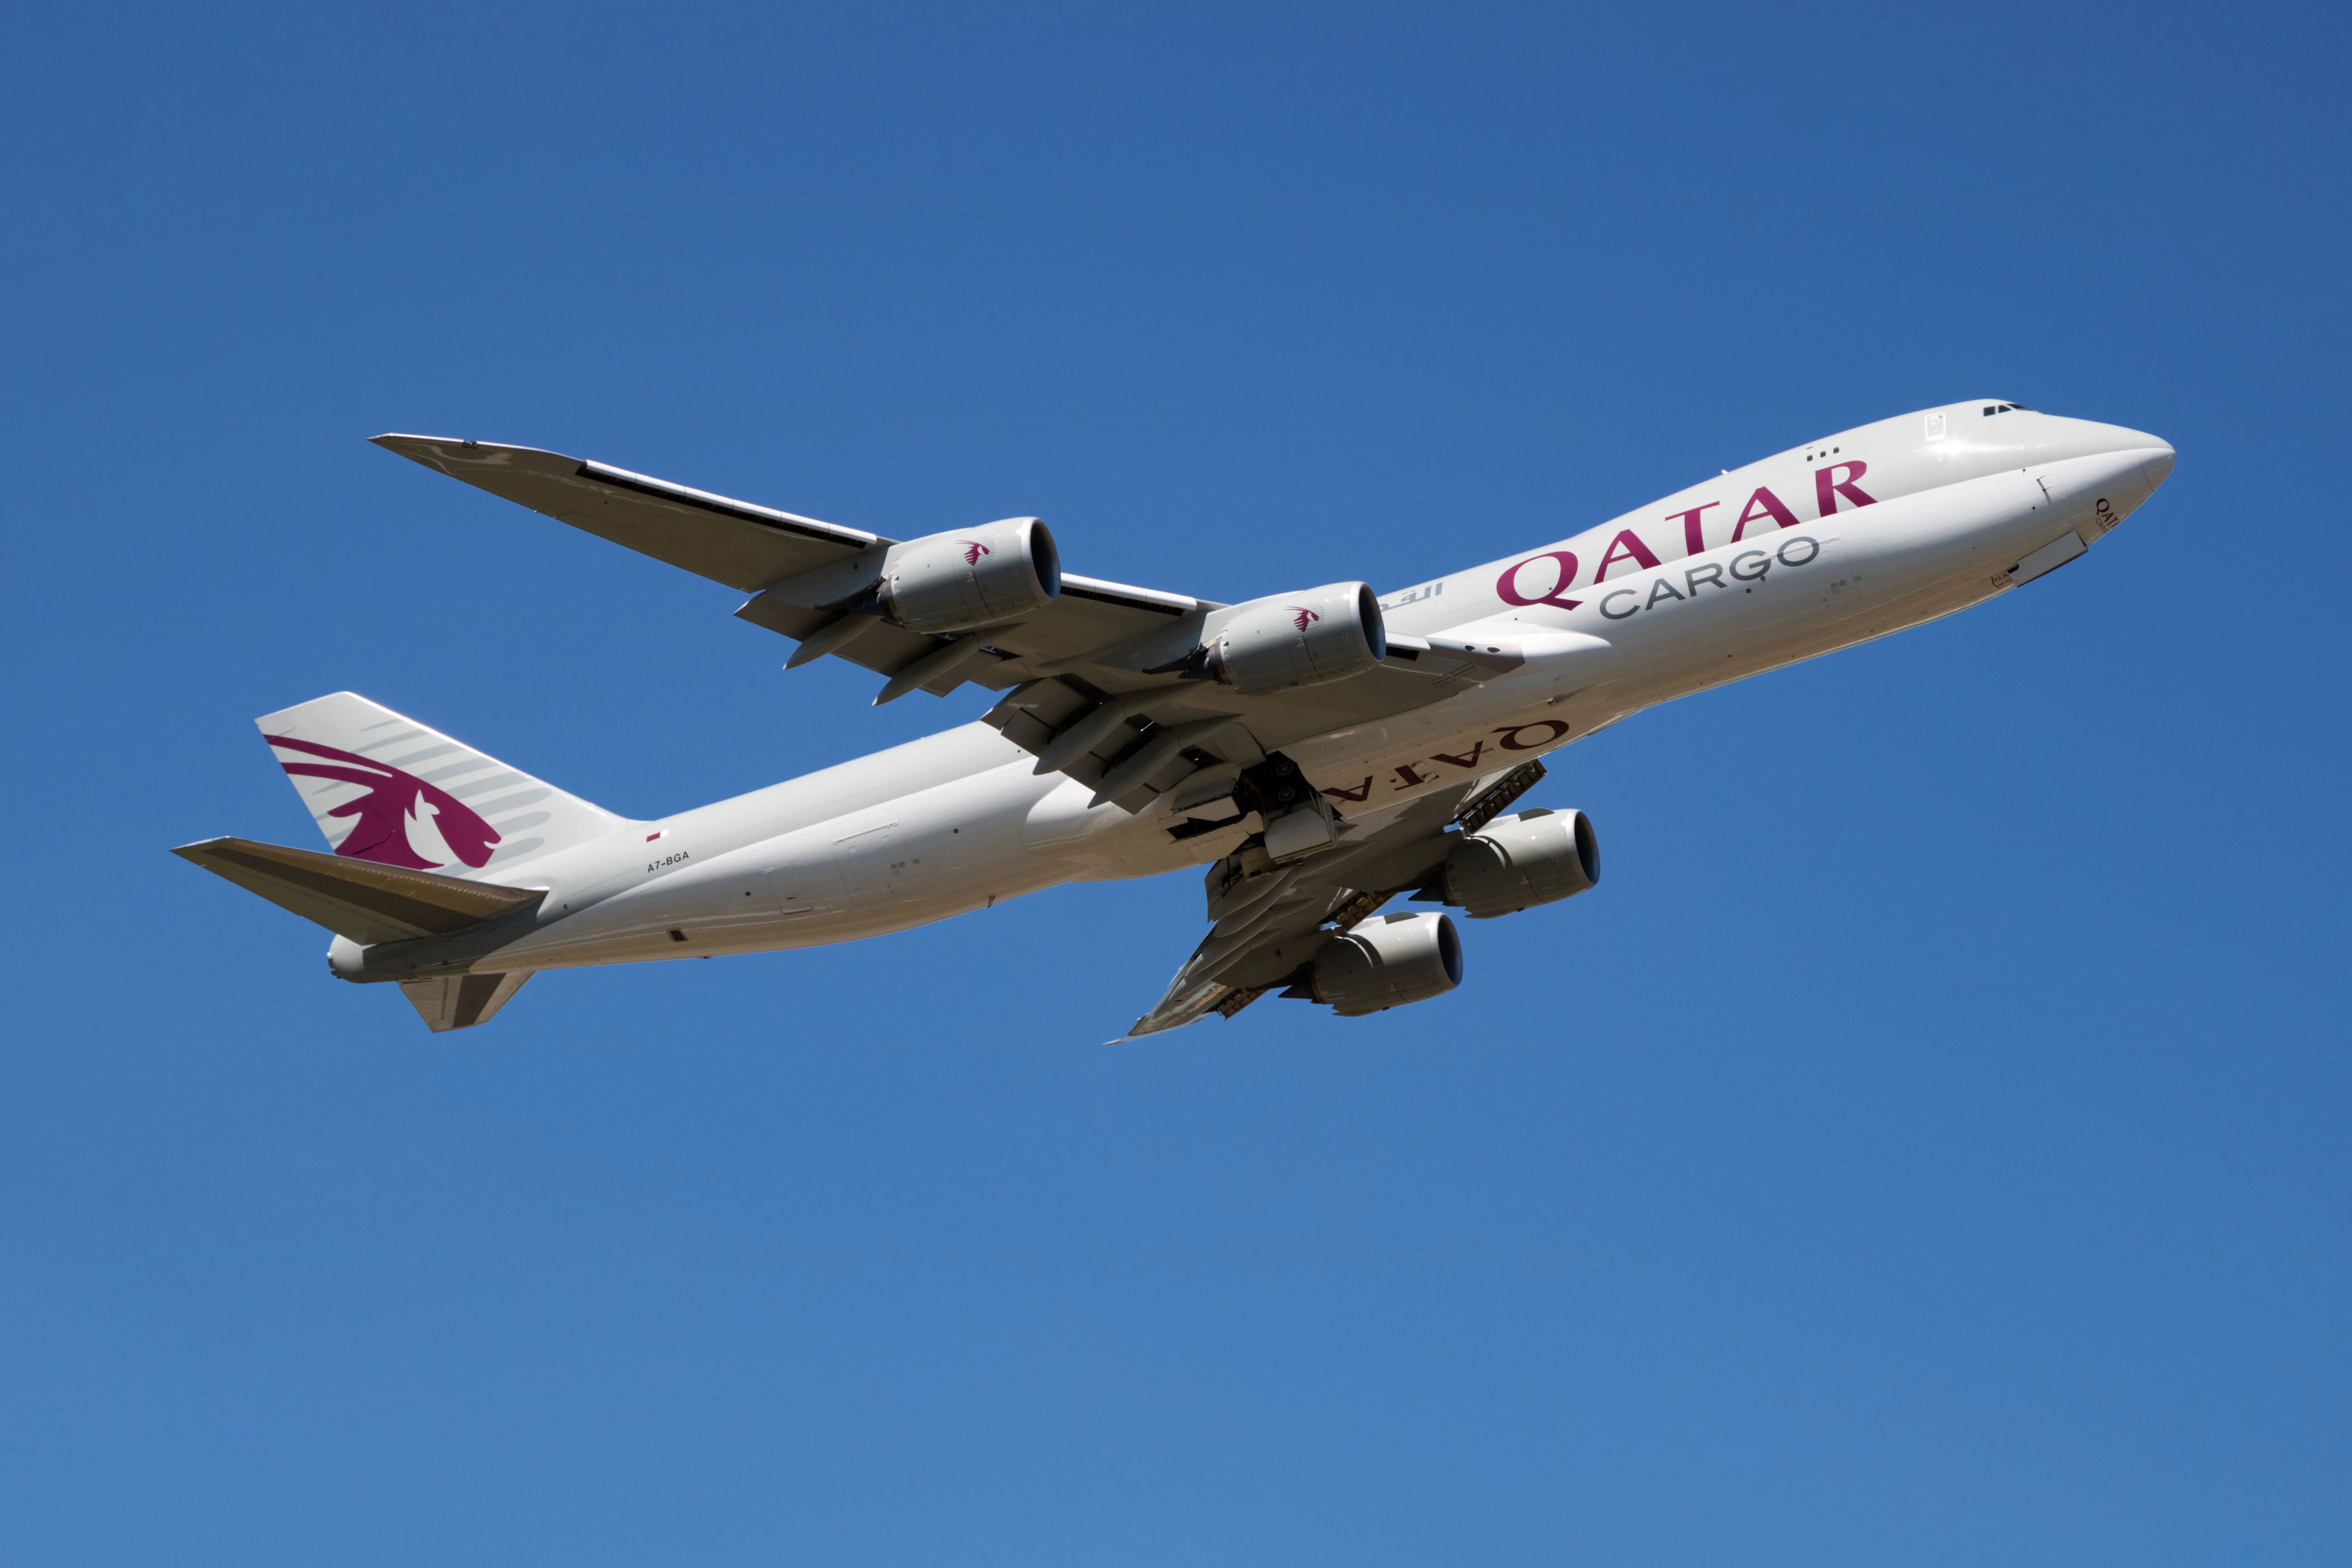 boeing 747-8f retirement? qatar airways appears to have quietly removed the freighter